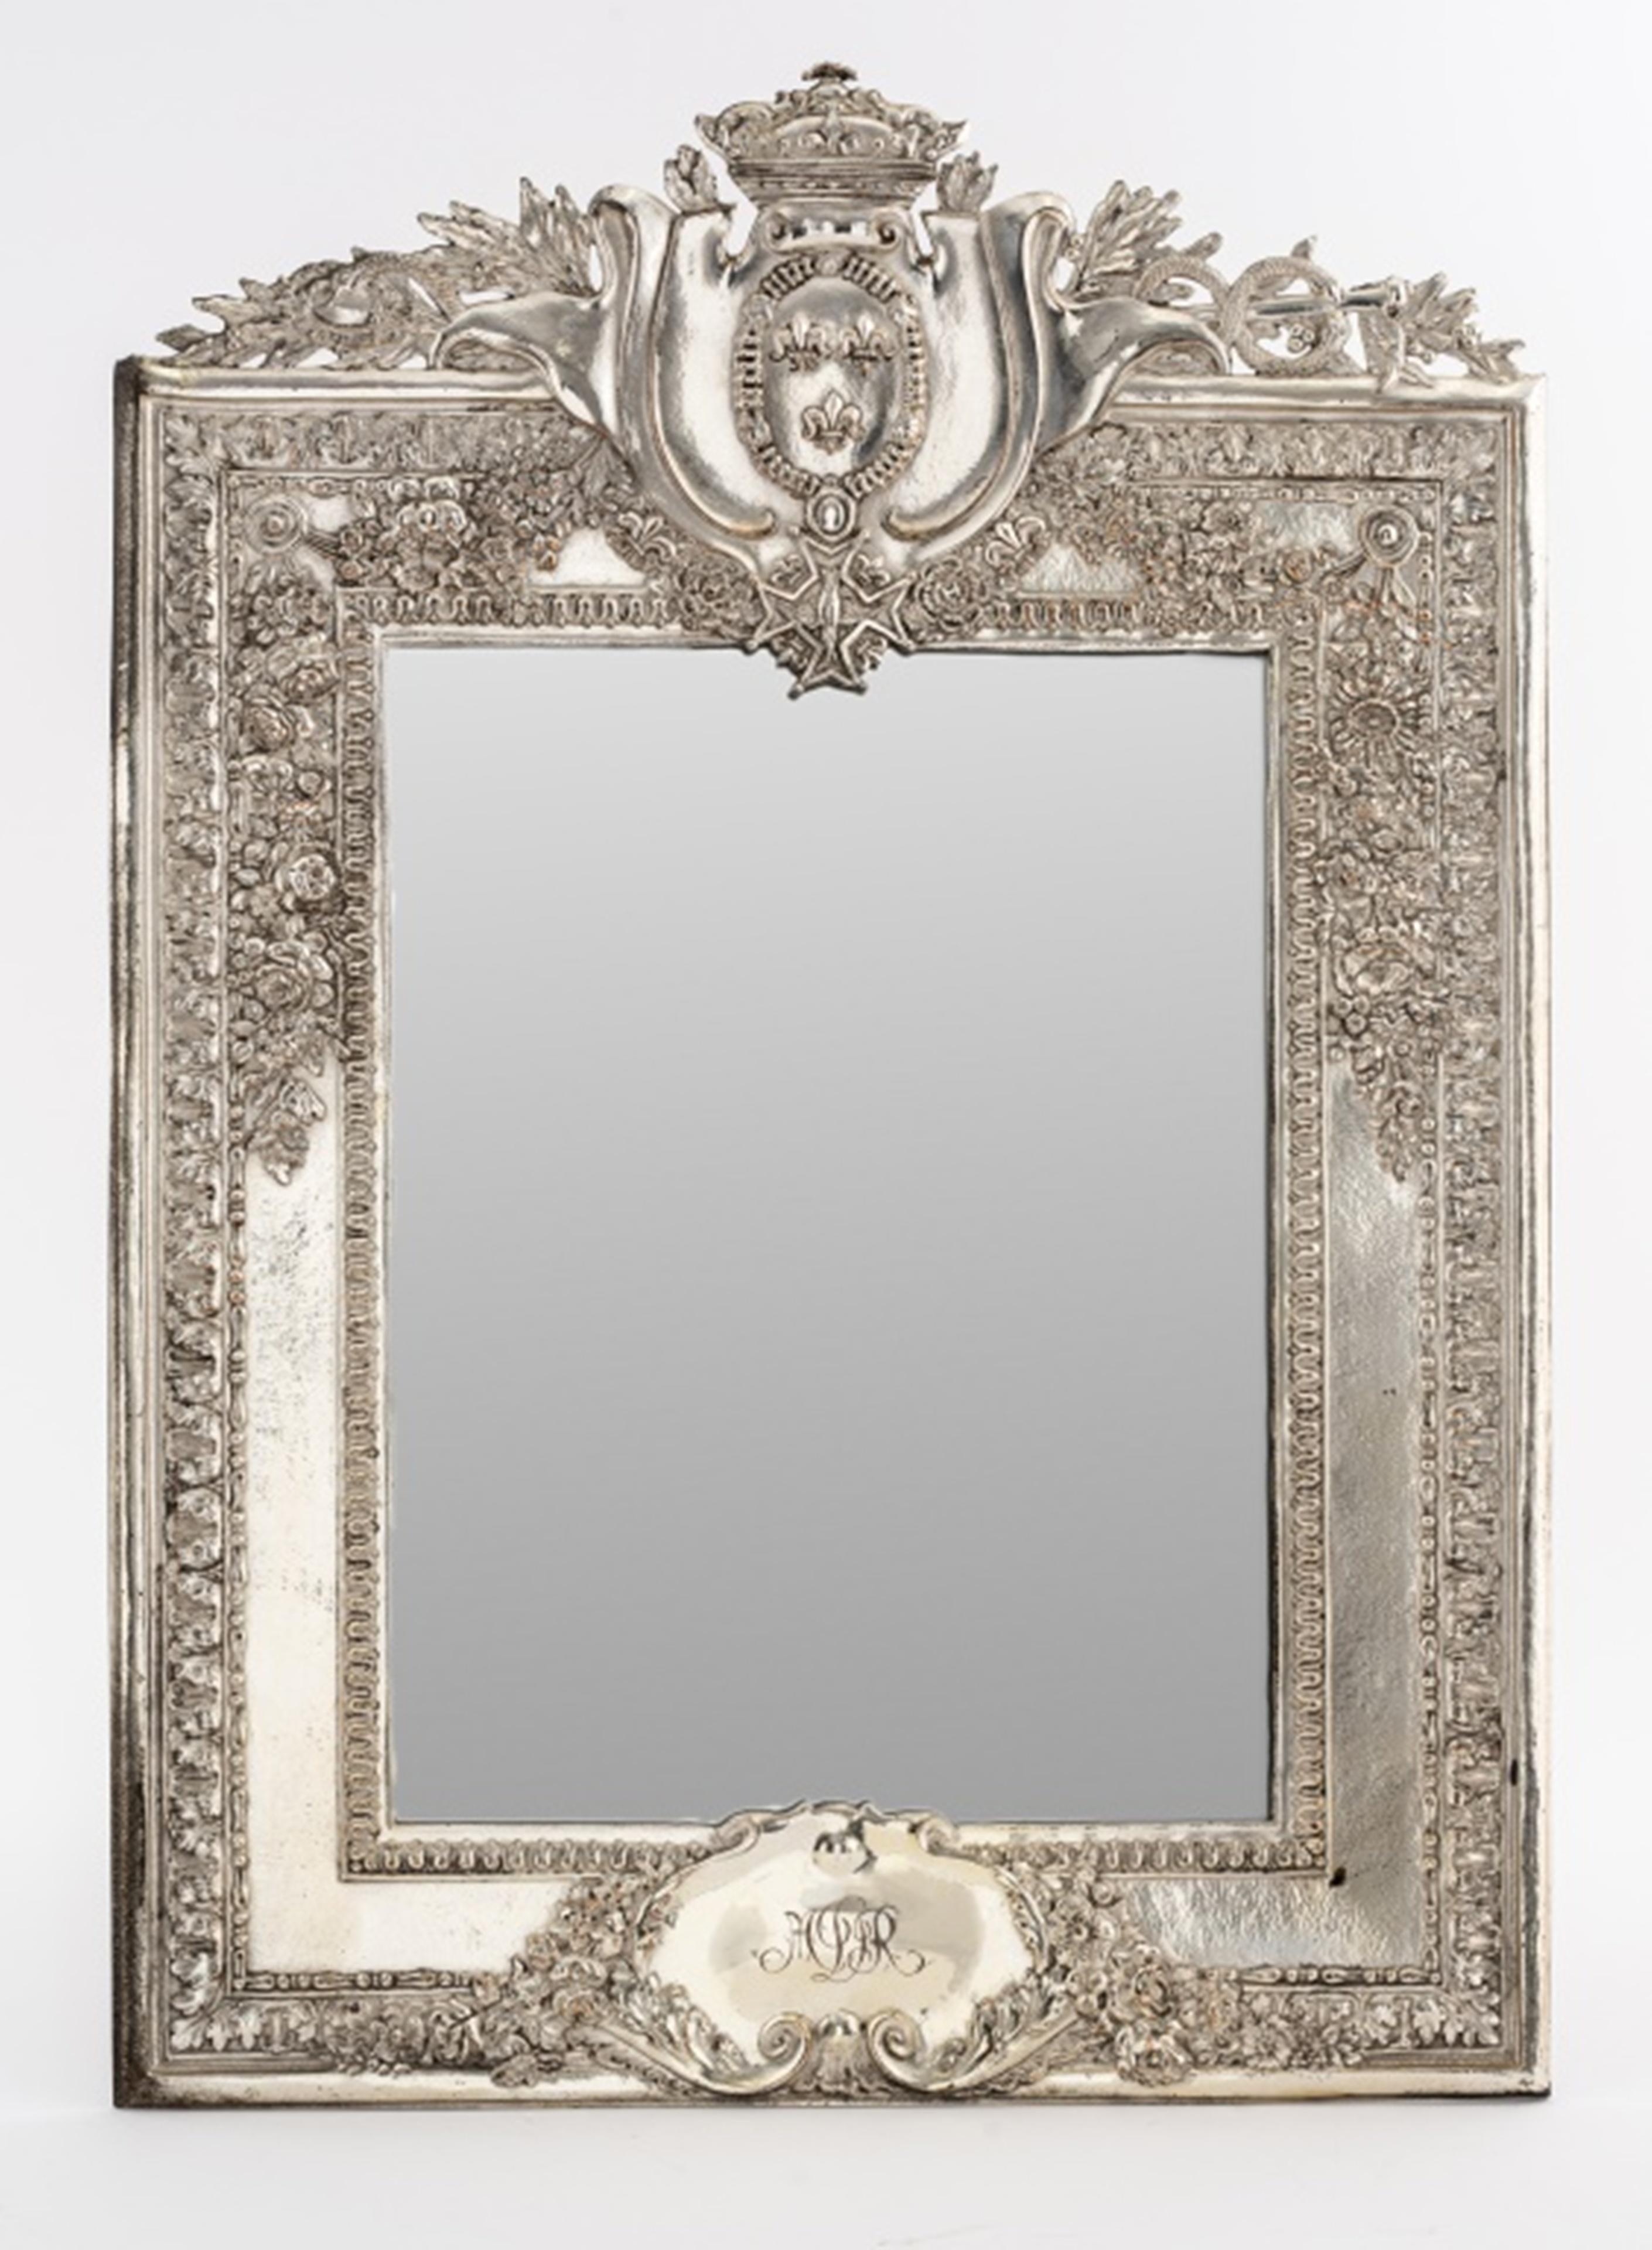 French silver-plated copper mirror in the Louis XIV taste with foliate decoration, 19th c. or later, monogrammed, maker's mark present on underside, possibly a galvanoplastic or electroype copy of an original object by a competitor of Elkington or